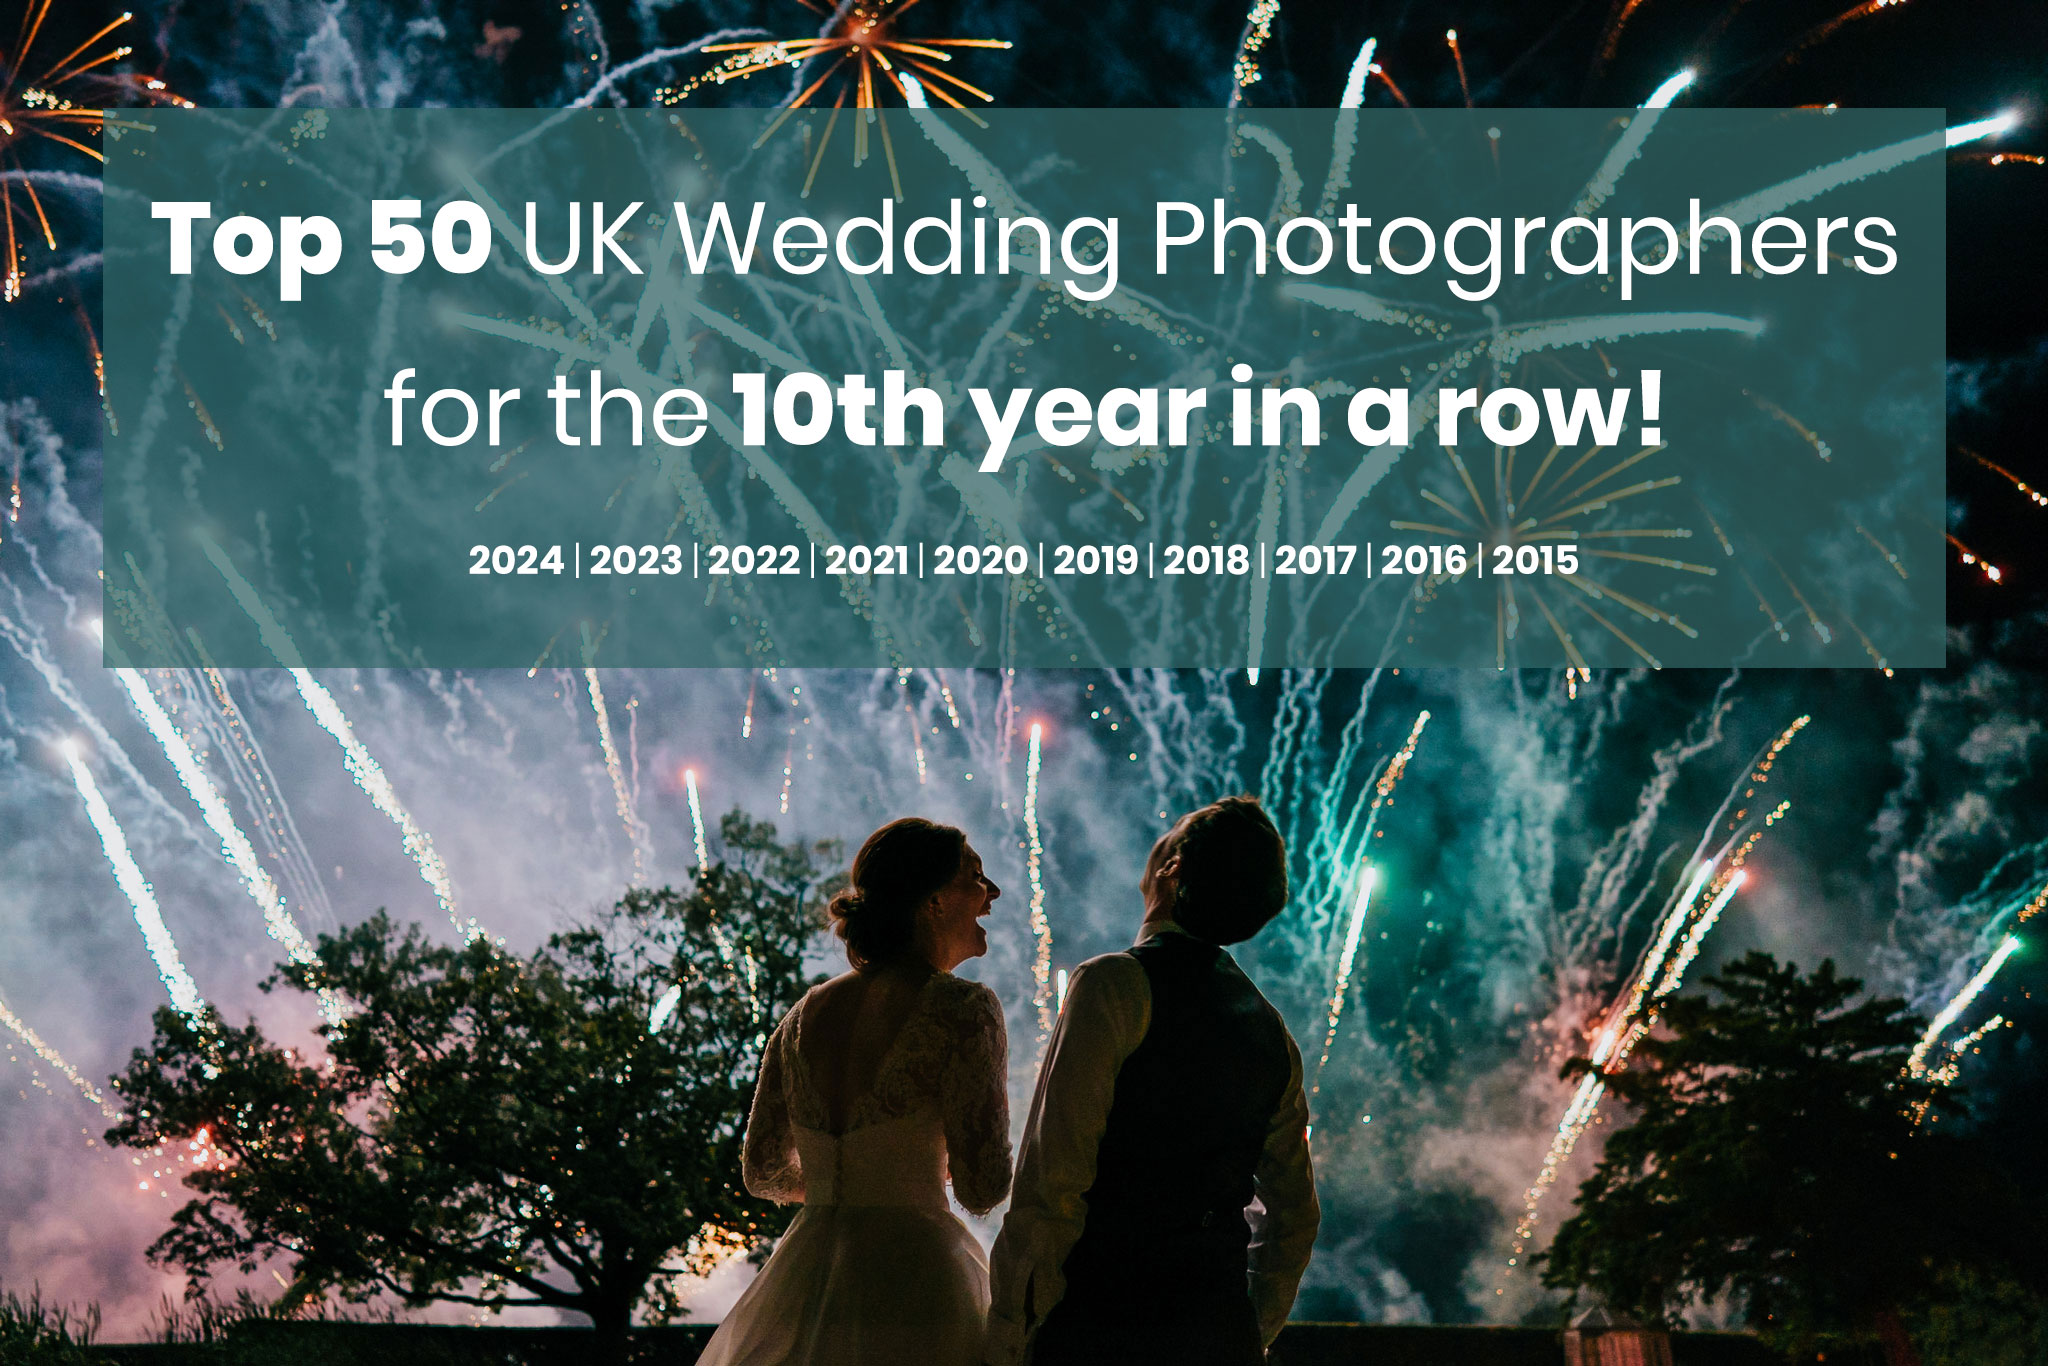 top 50 uk wedding photographers 10th year in a row - alan law